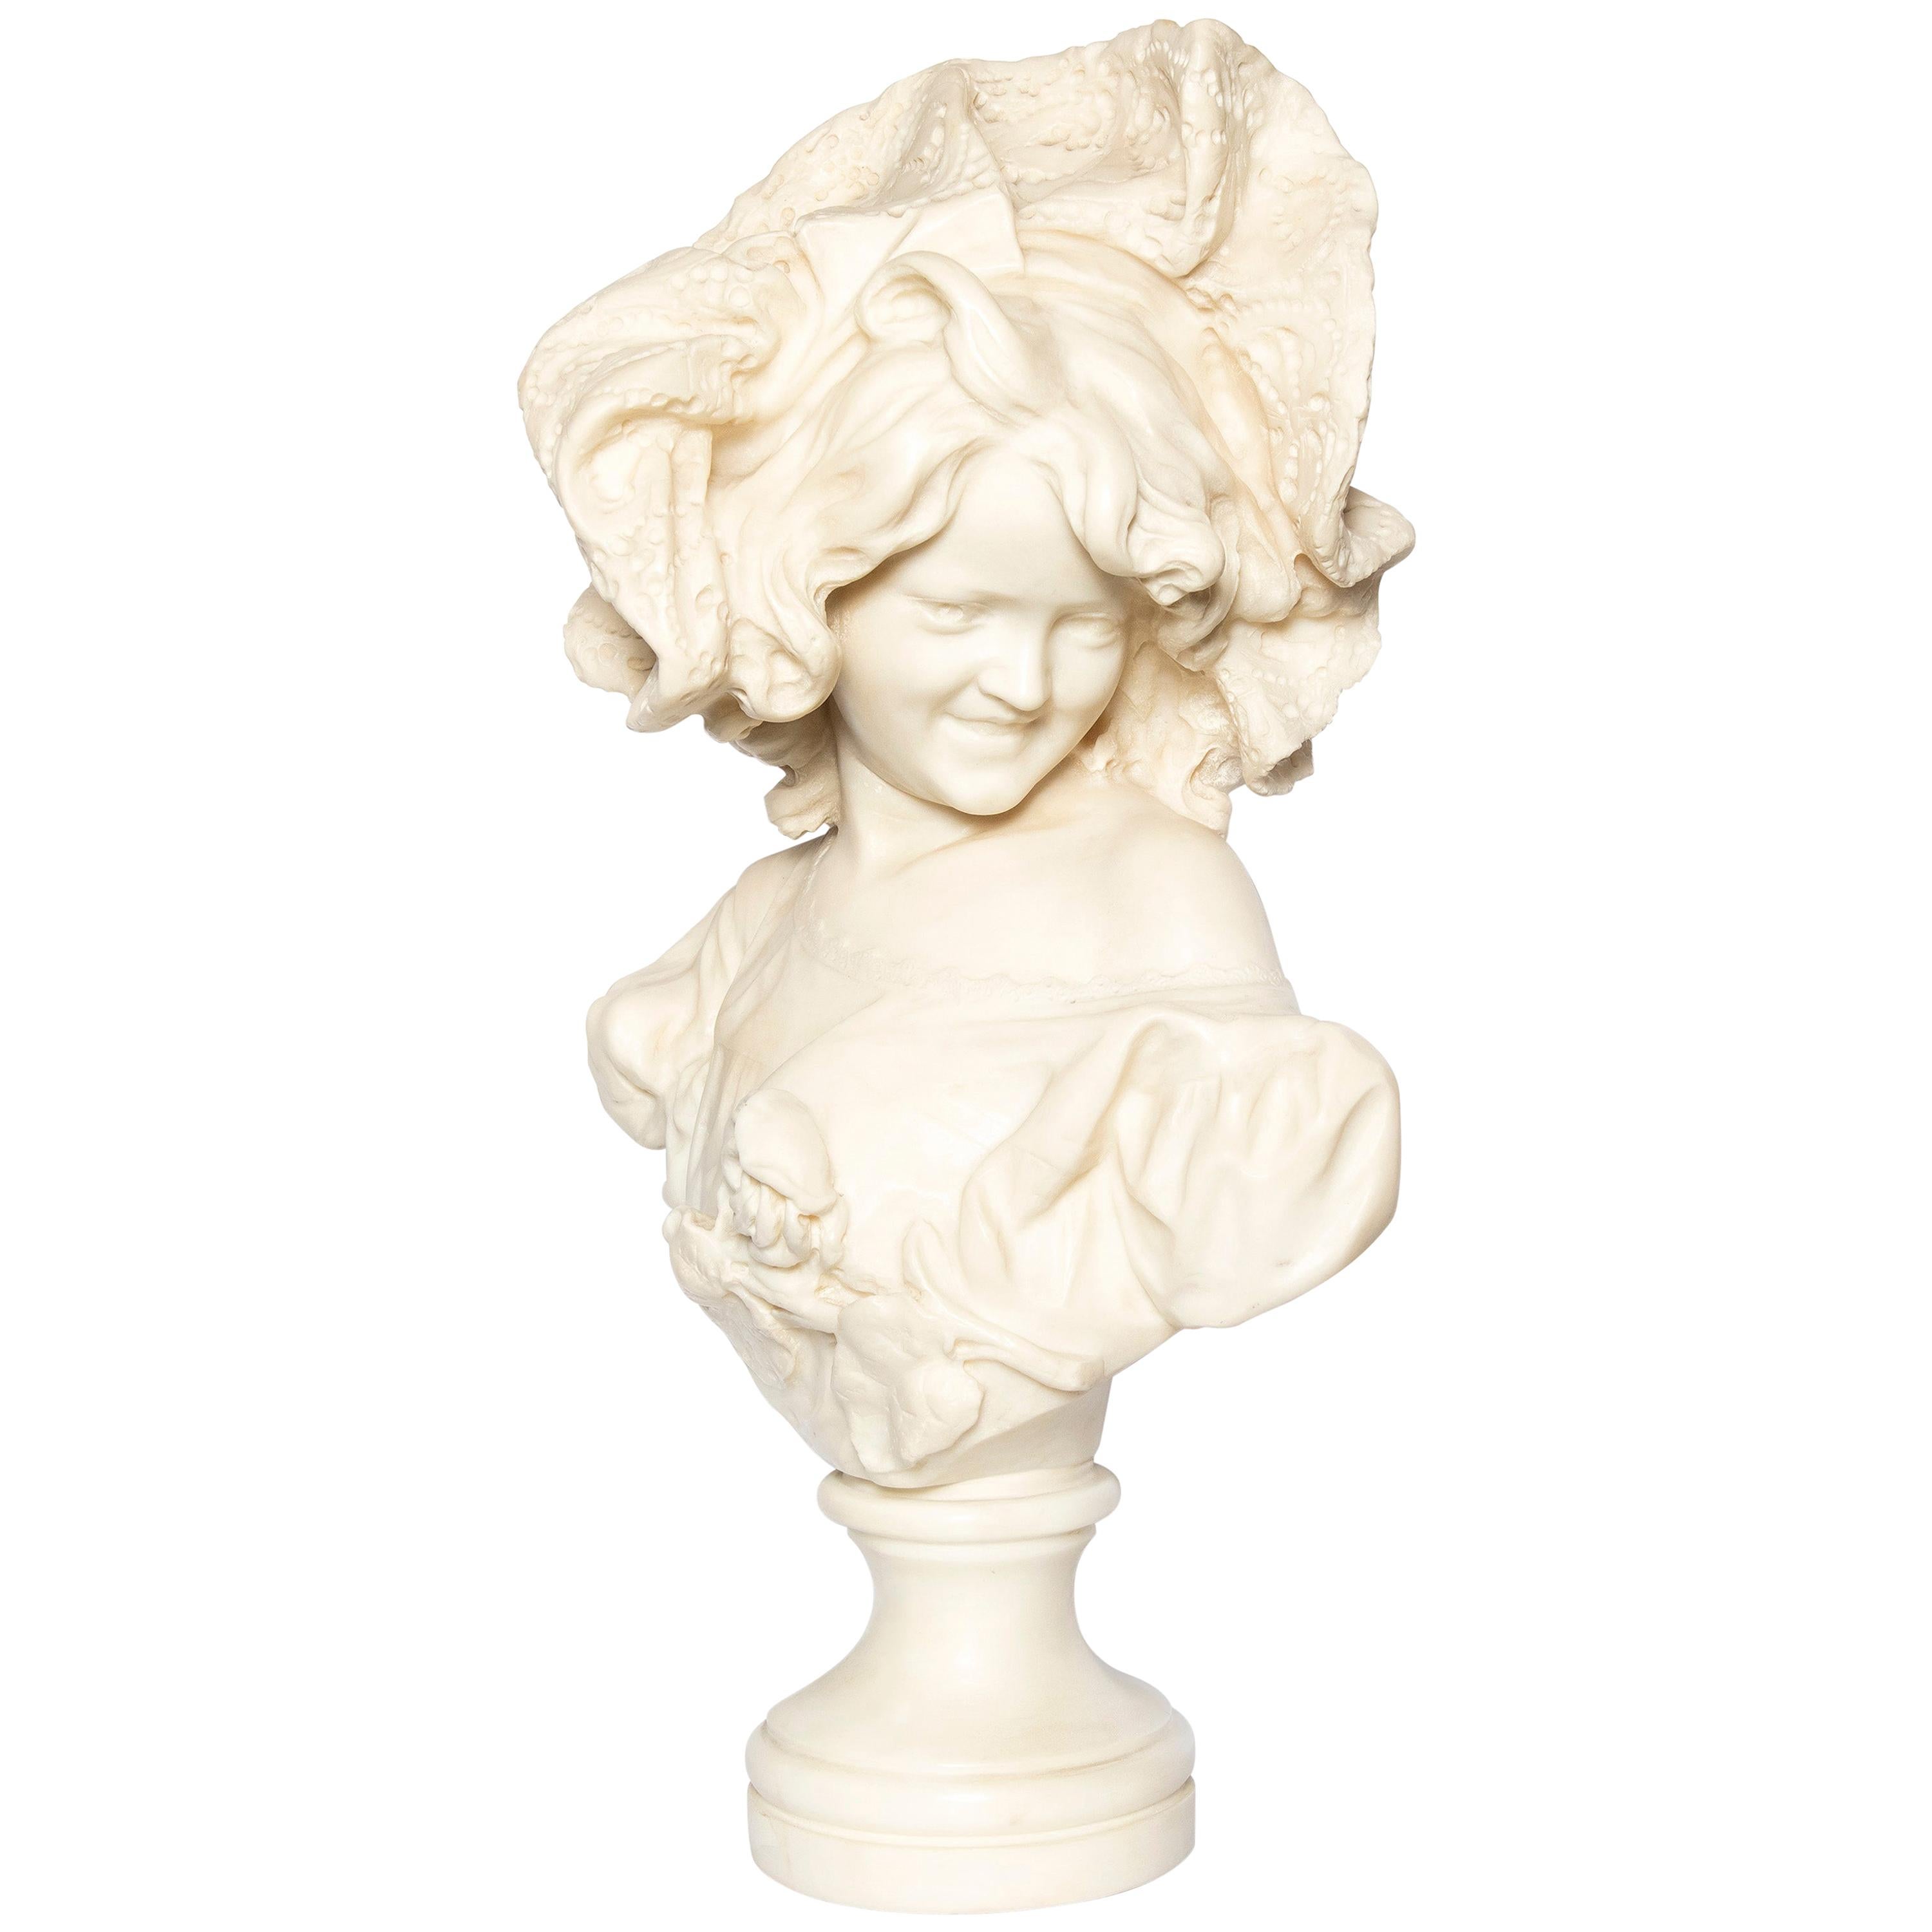 Carrara Marble Bust Signed P. Bazzanti, Italy, Florence, Late 19th Century